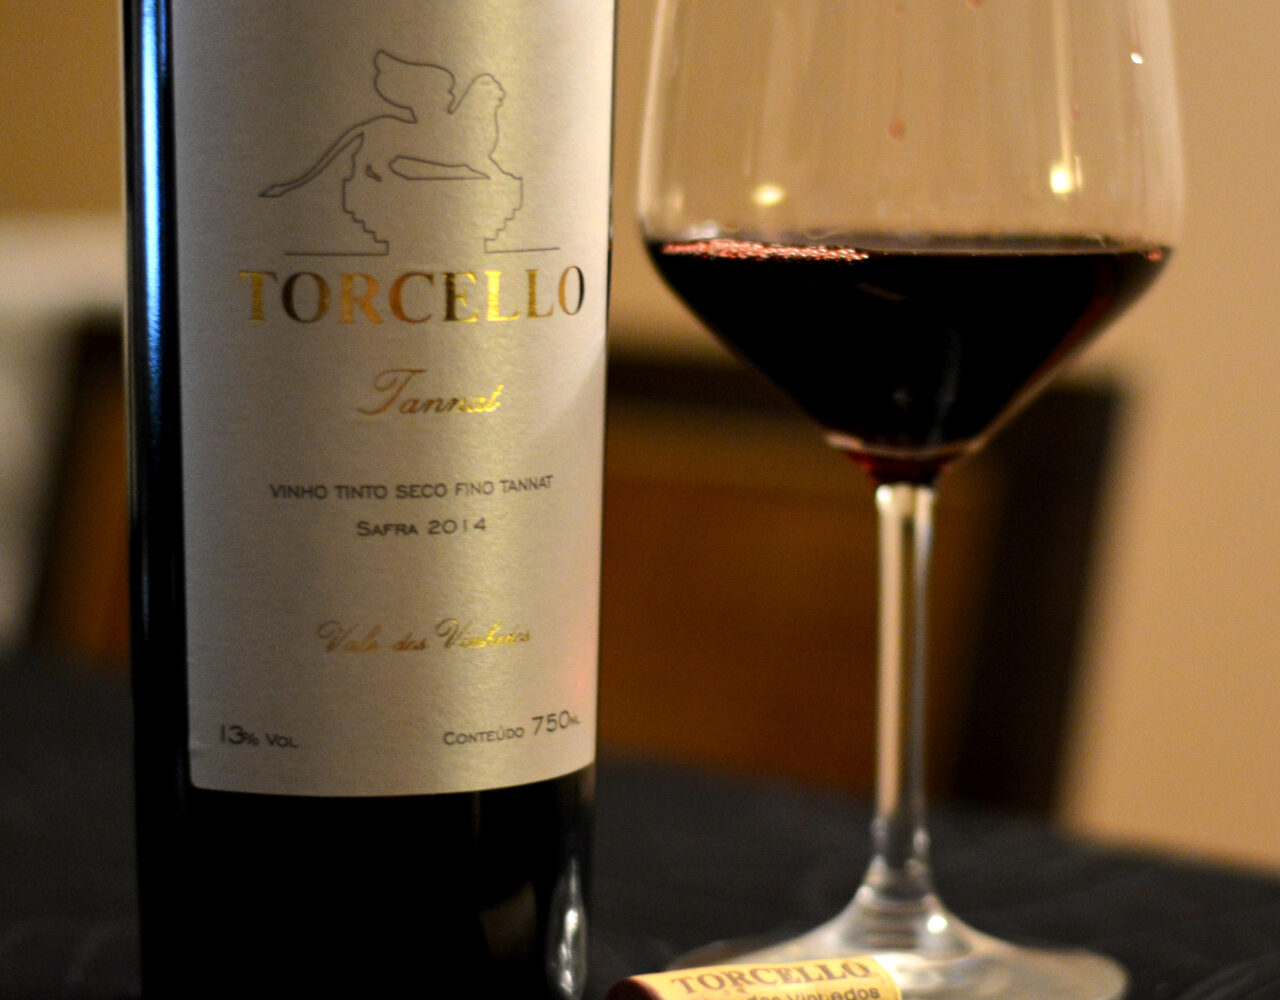 Torcello Tannat  2014: Review